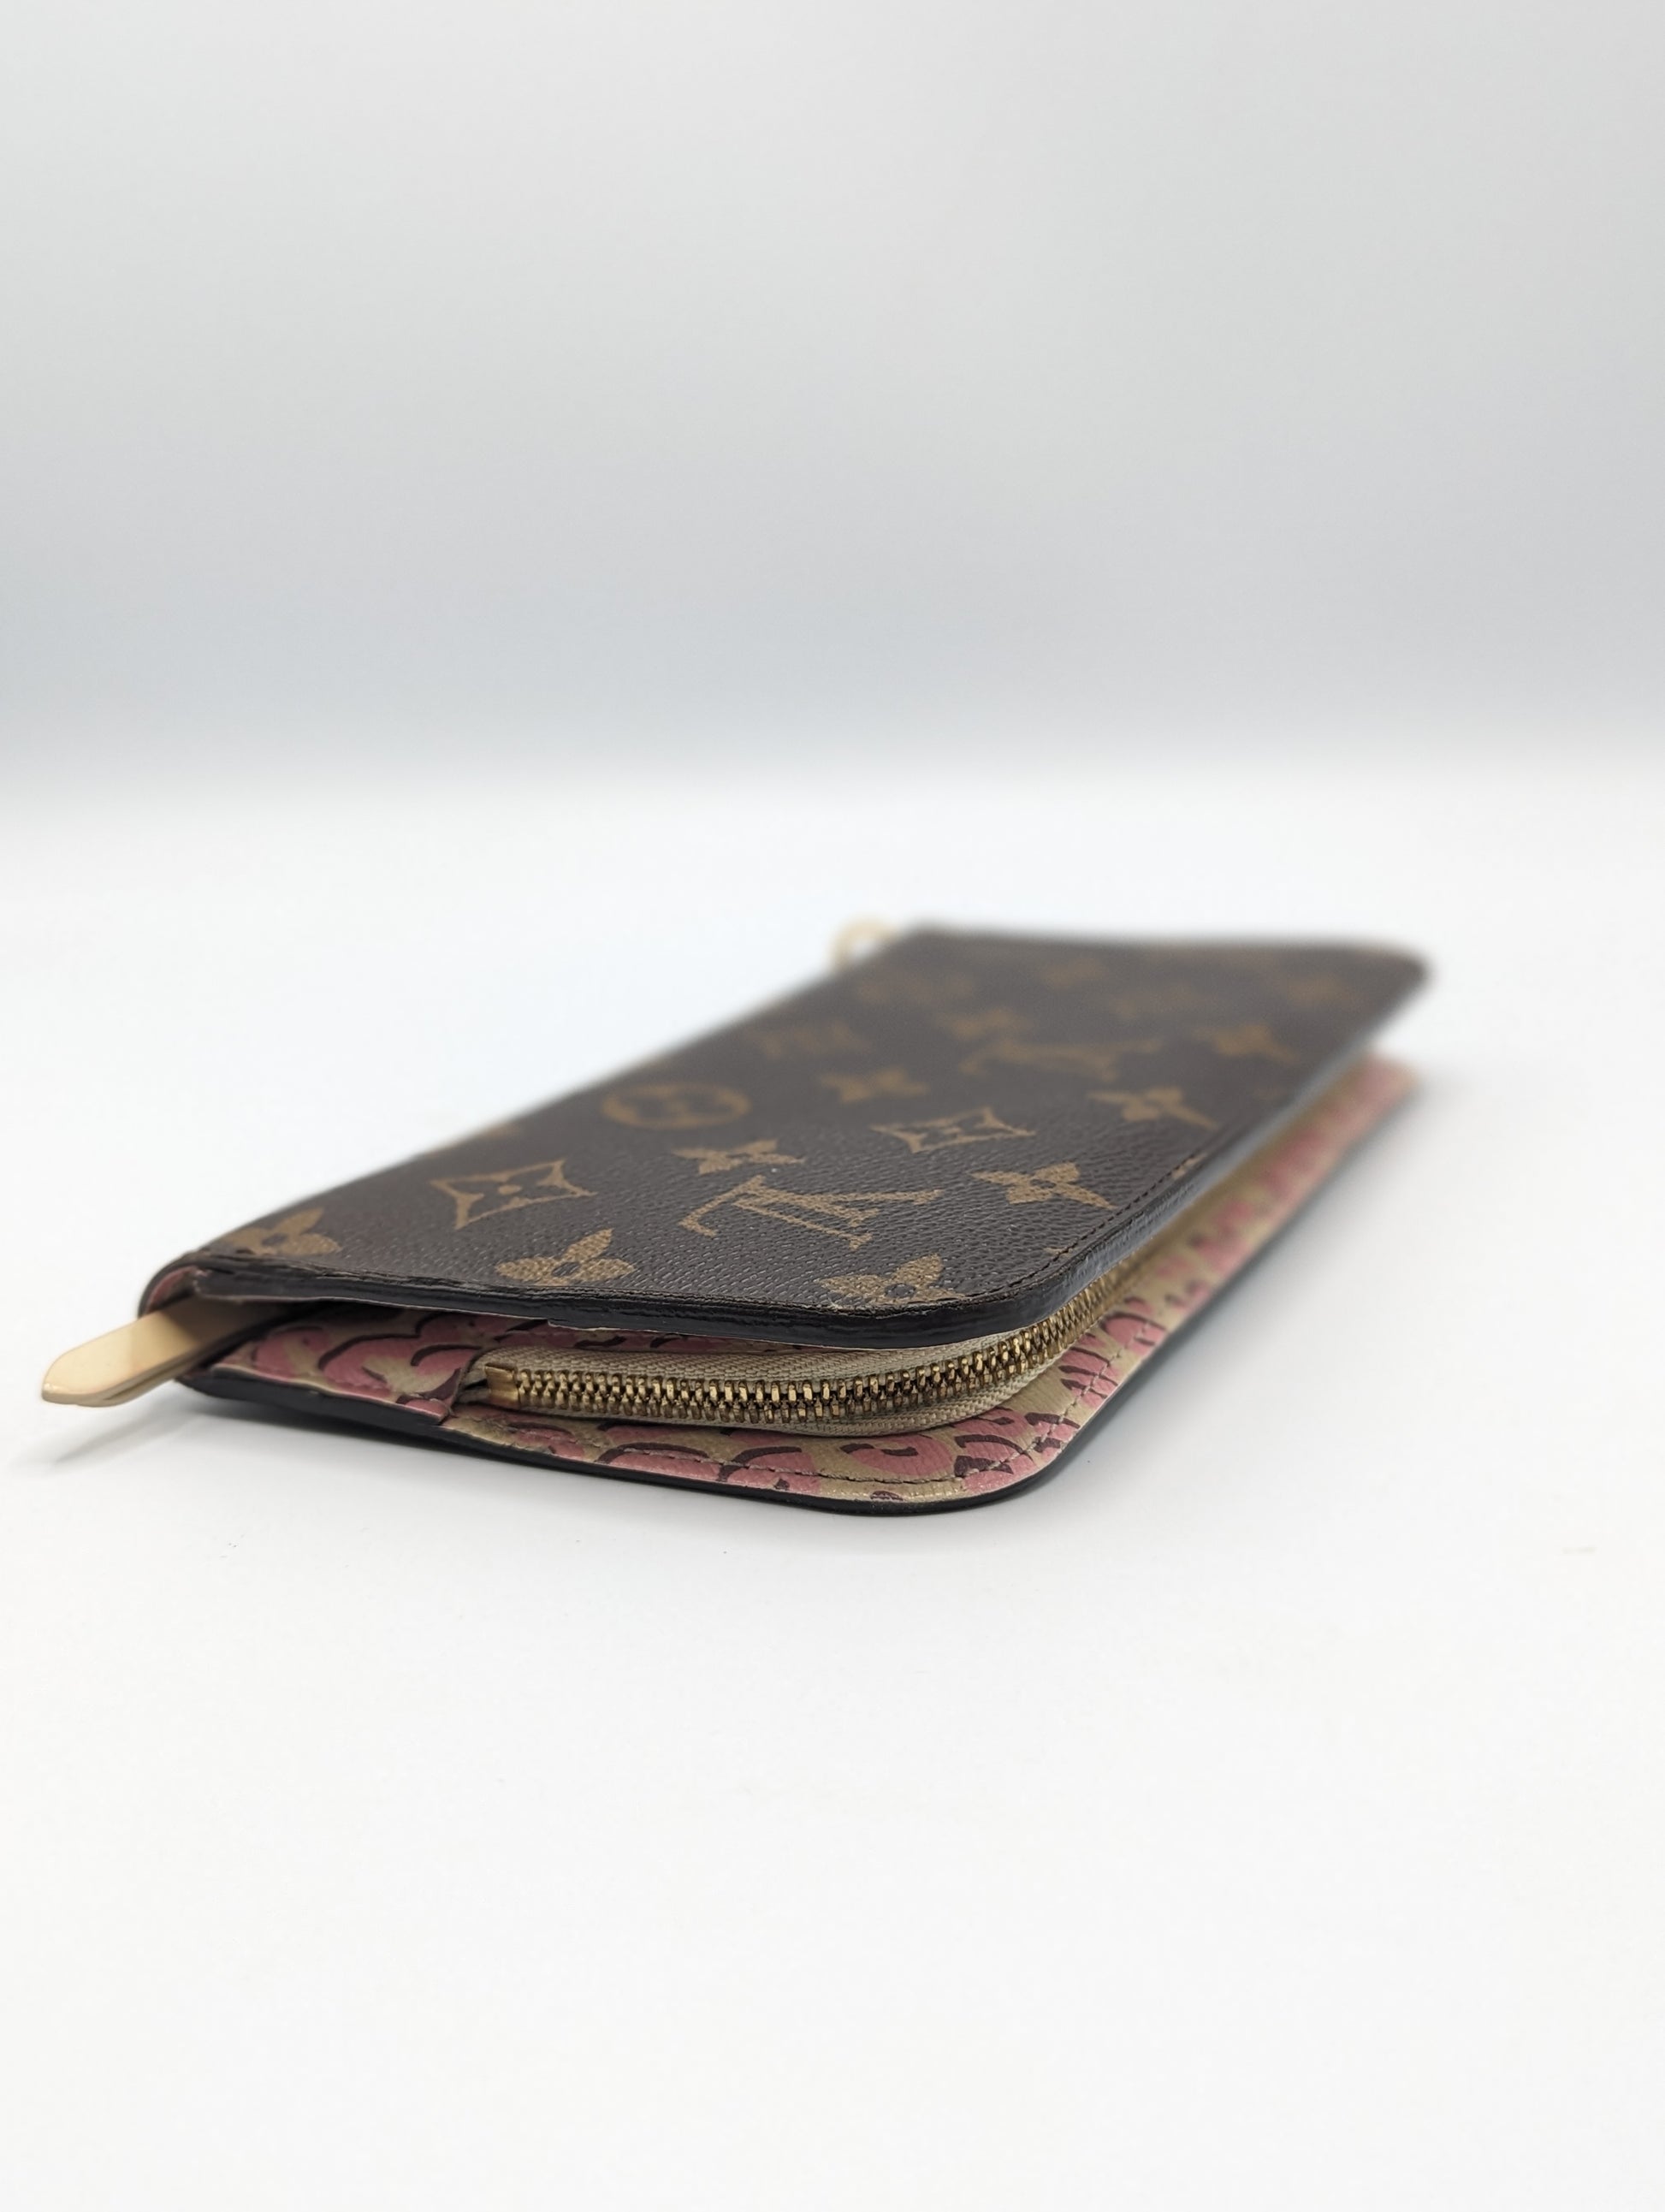 Louis Vuitton x Stephen Sprouse Monogram Leopard Insolite Wallet – For The  Love of Luxury